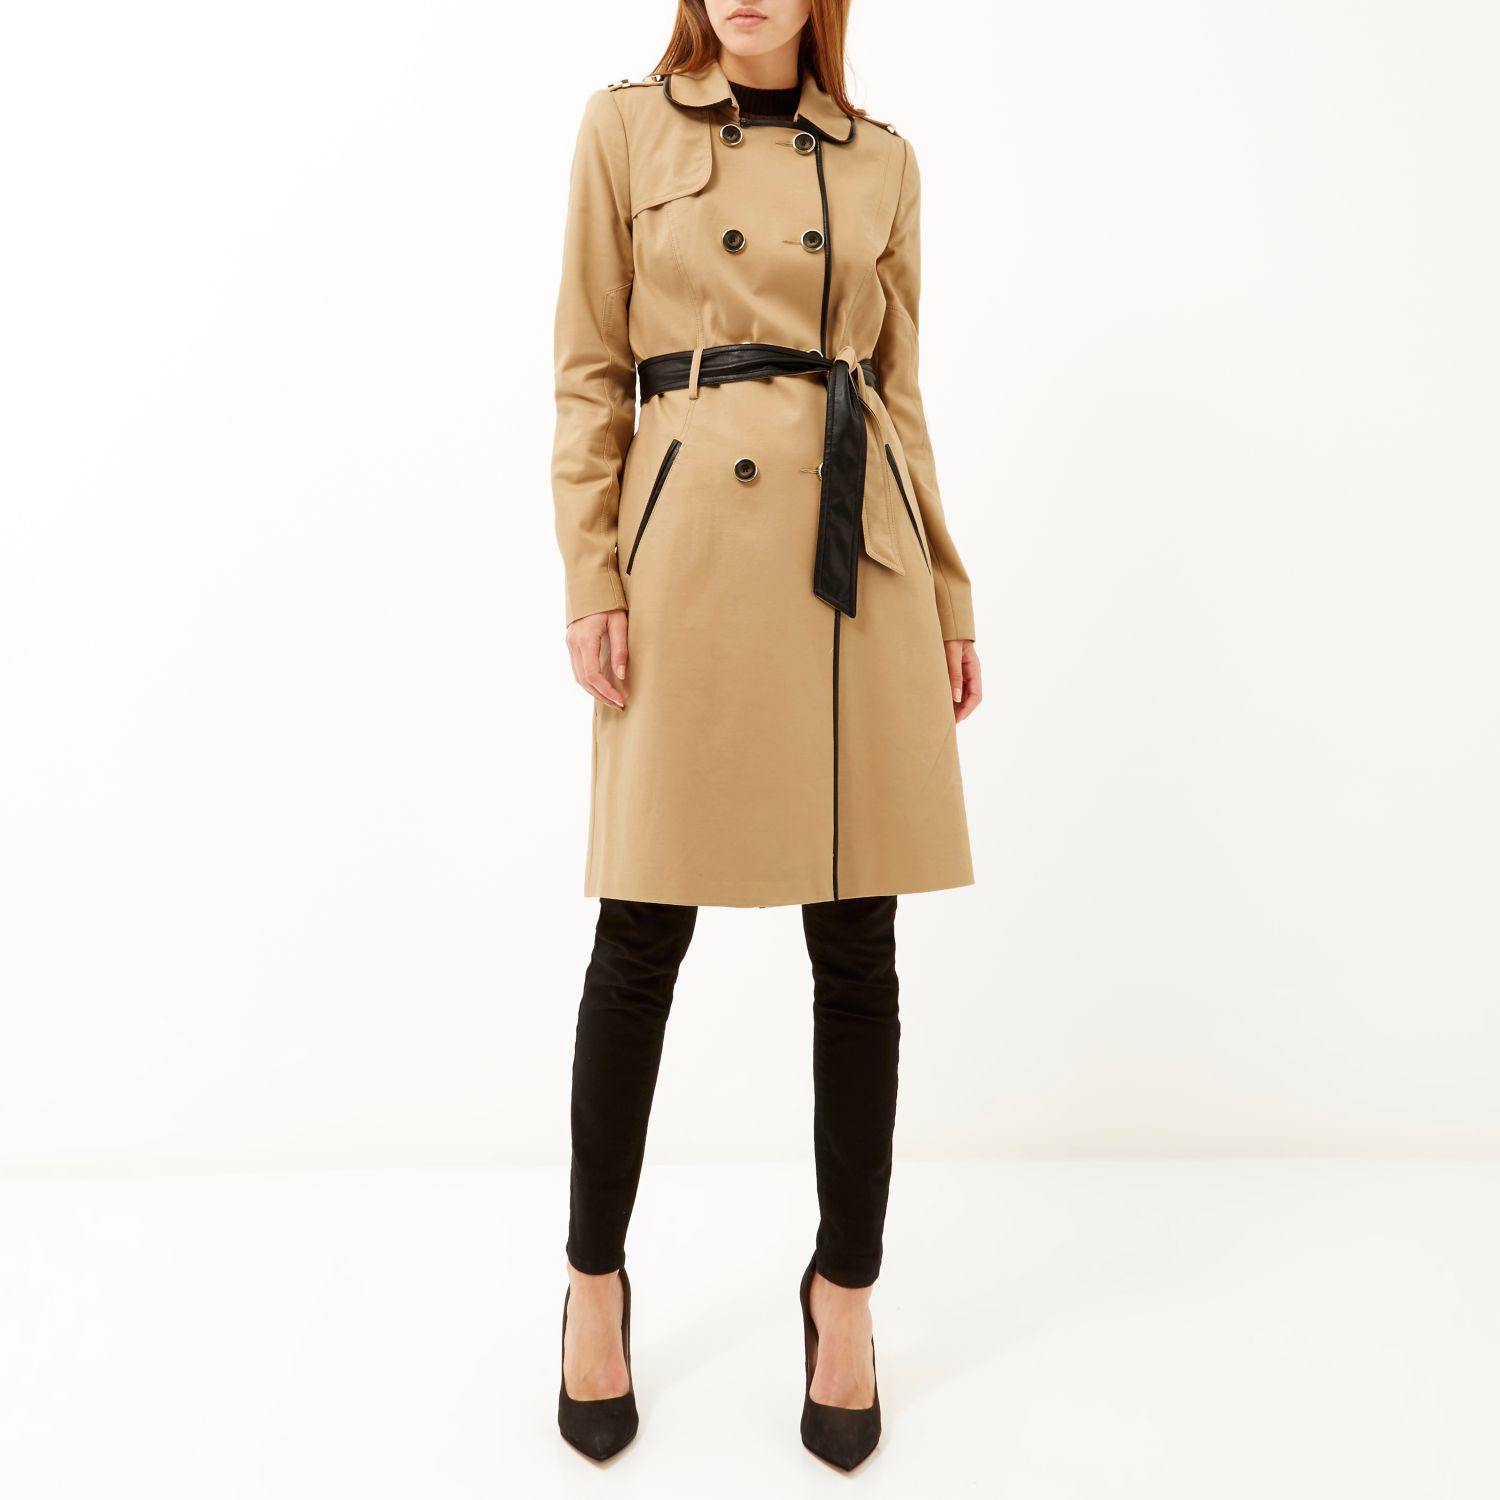 River island Camel Leather-Look Trim Trench Coat in Beige (Cream) | Lyst